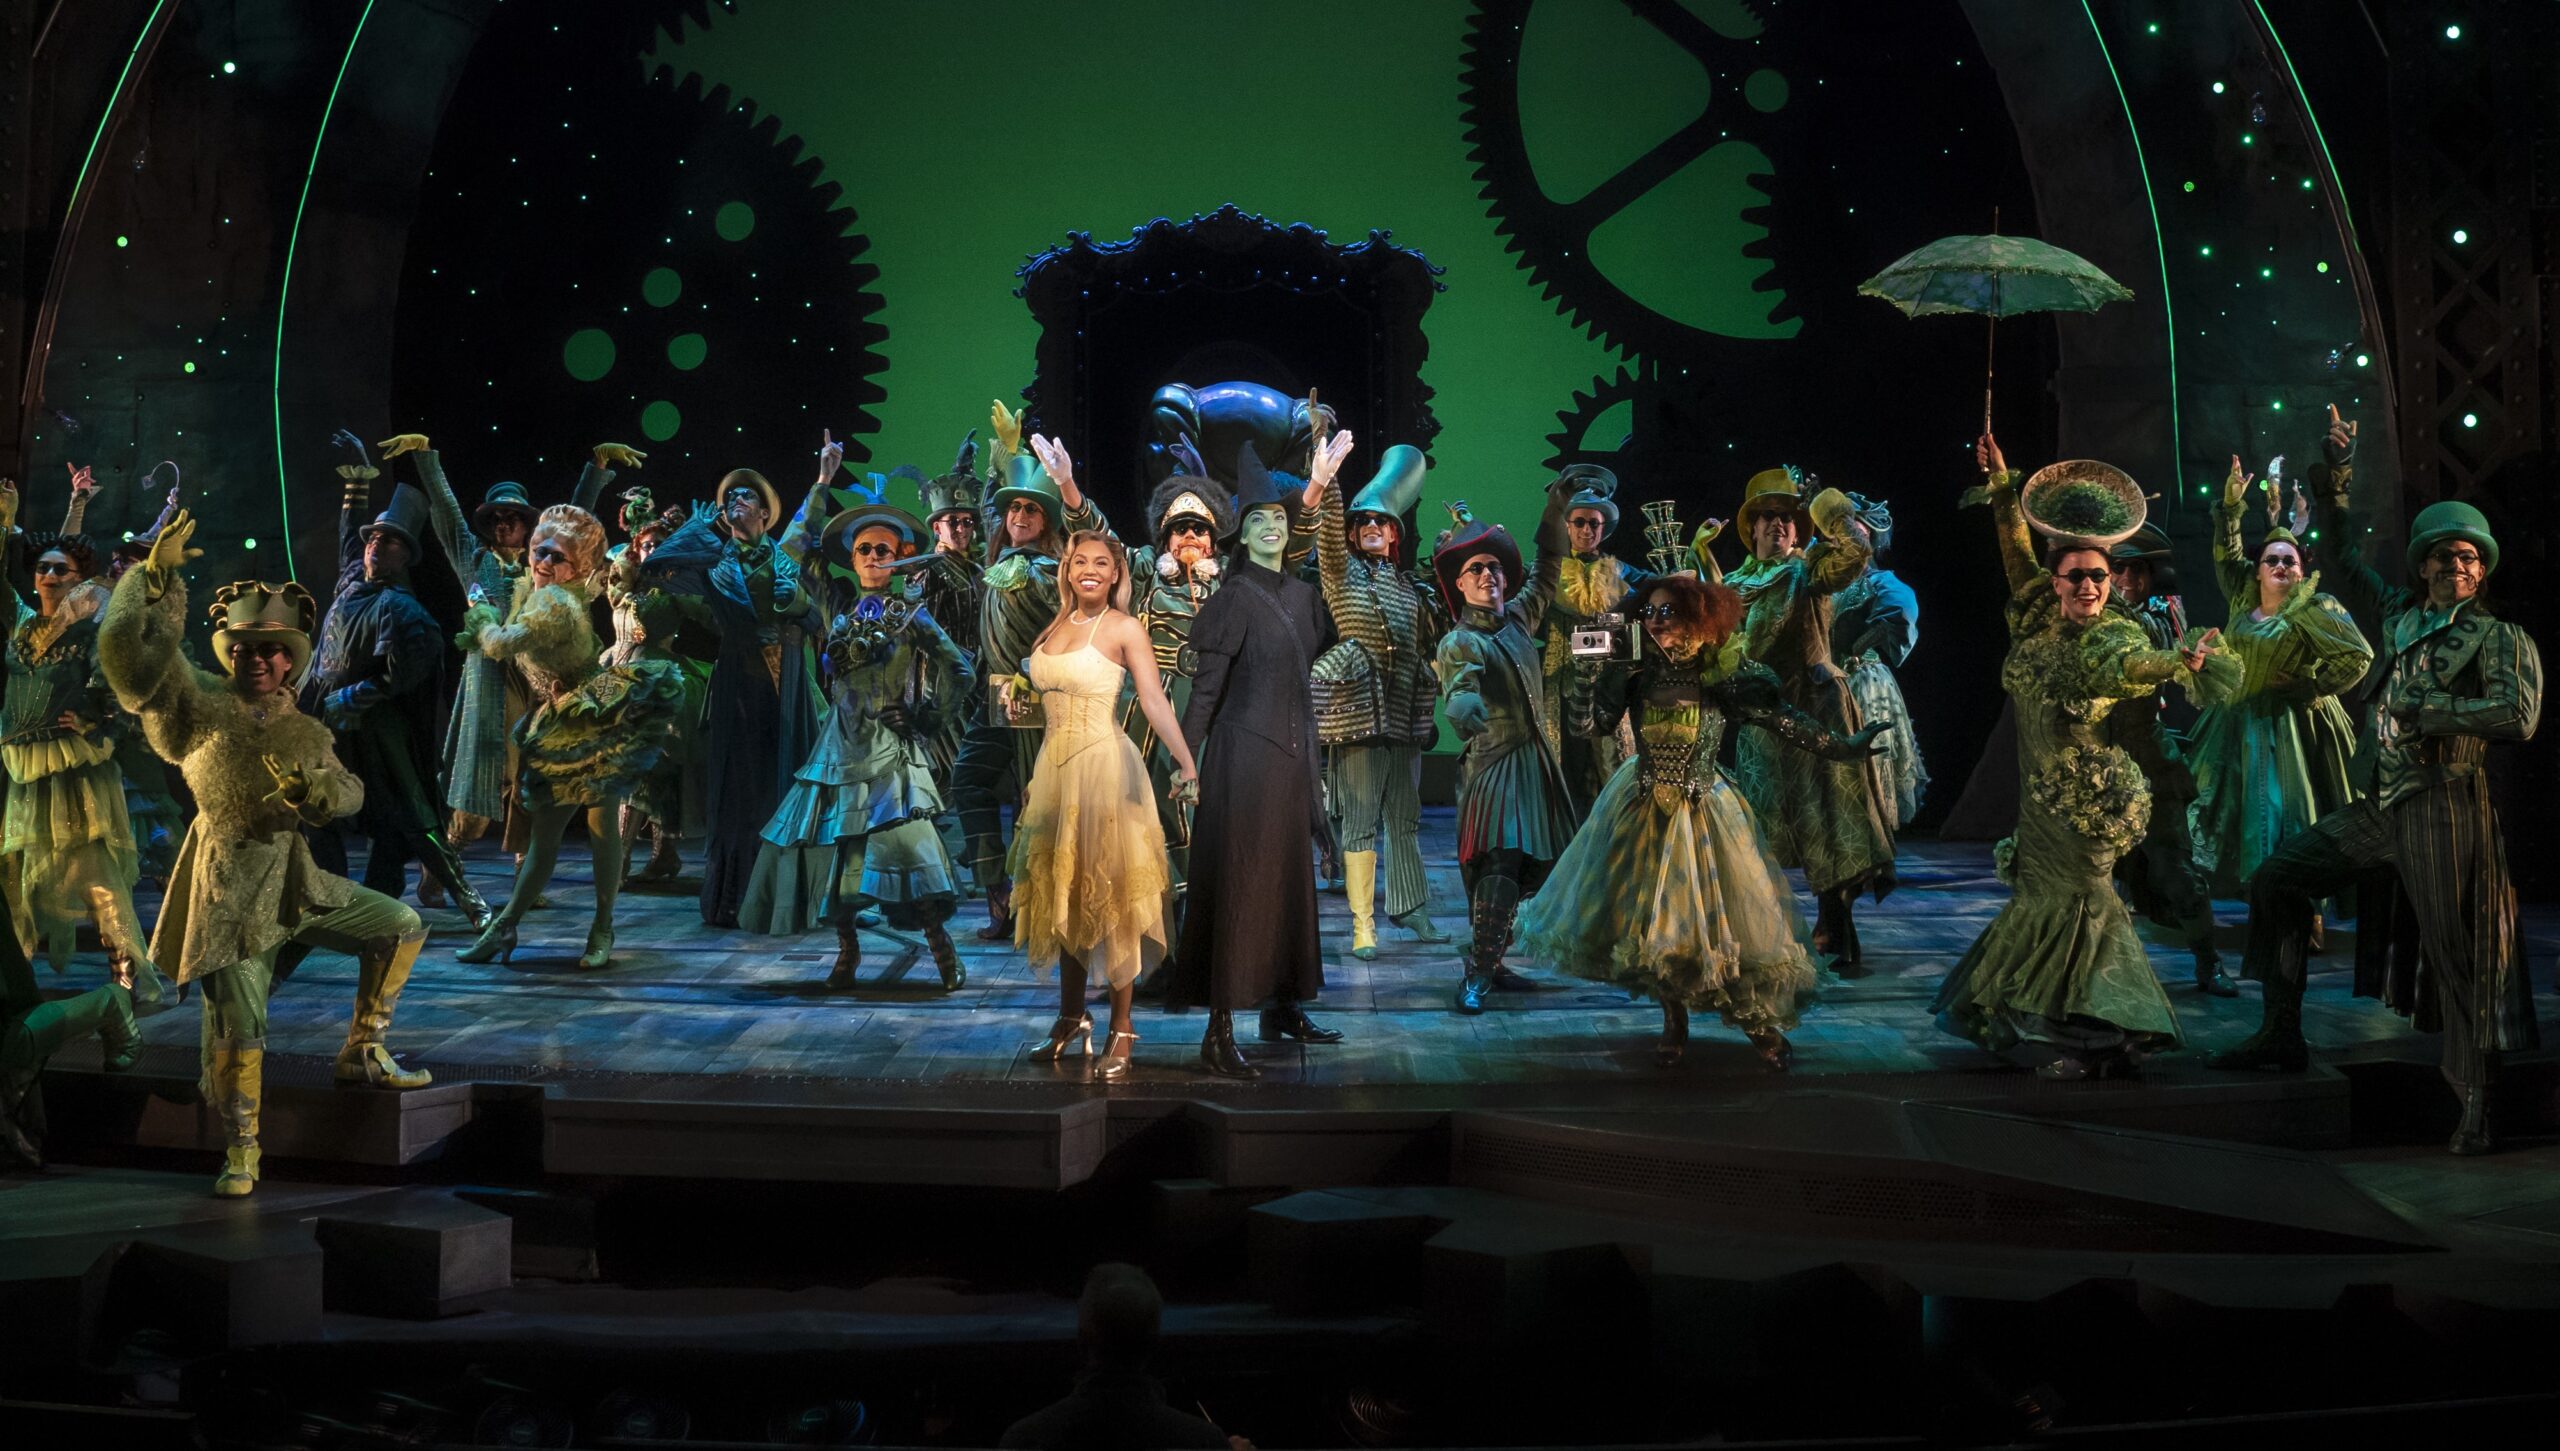 a group of performers on stage, one in a yellow dress, the other in black with green skin, the ensemble behind them